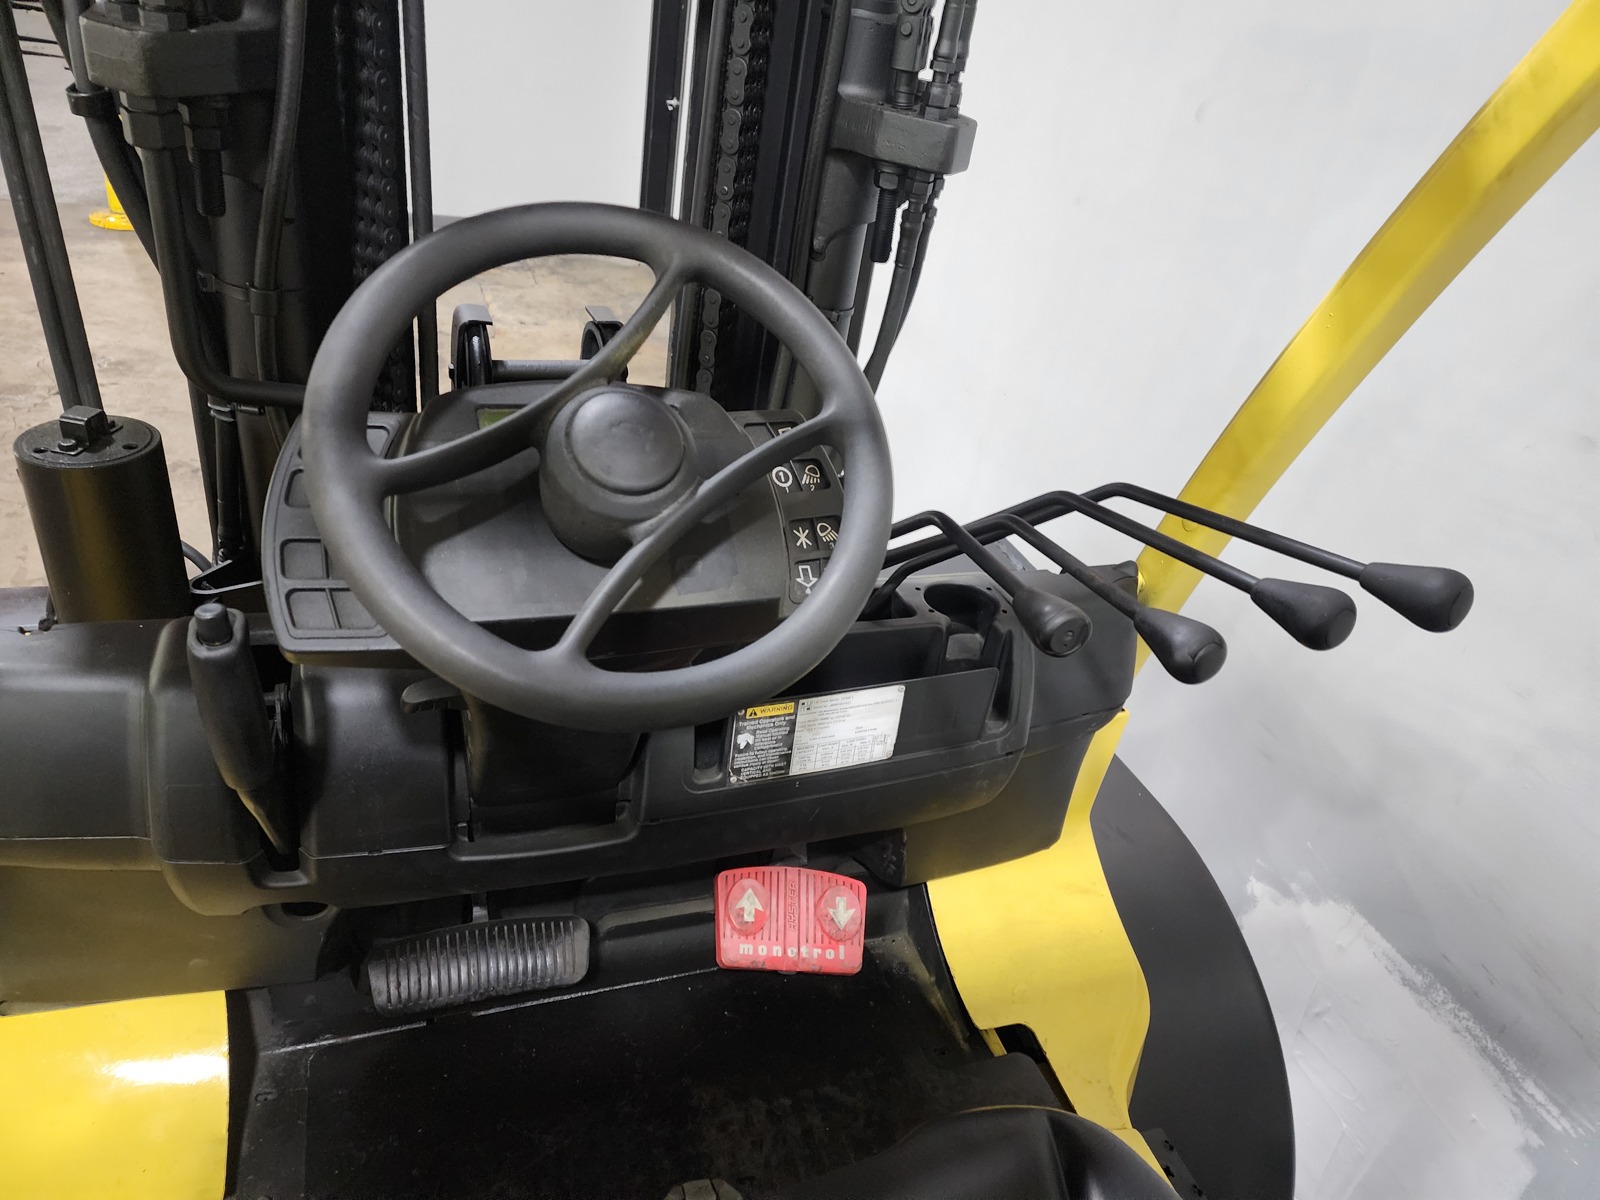 Used 2011 HYSTER H155FT  | Cary, IL